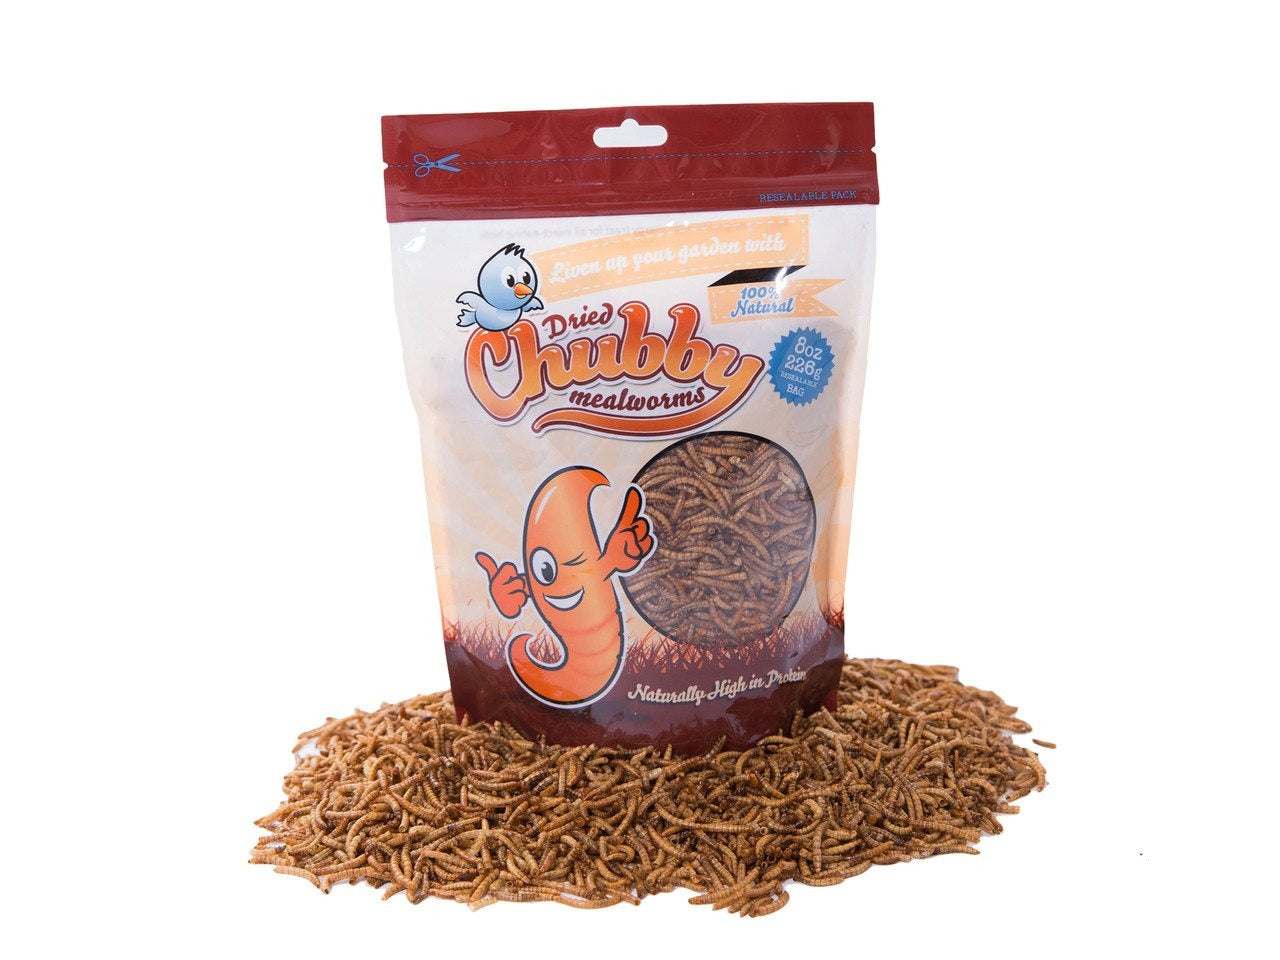 226g (8oz) Chubby Dried Mealworms